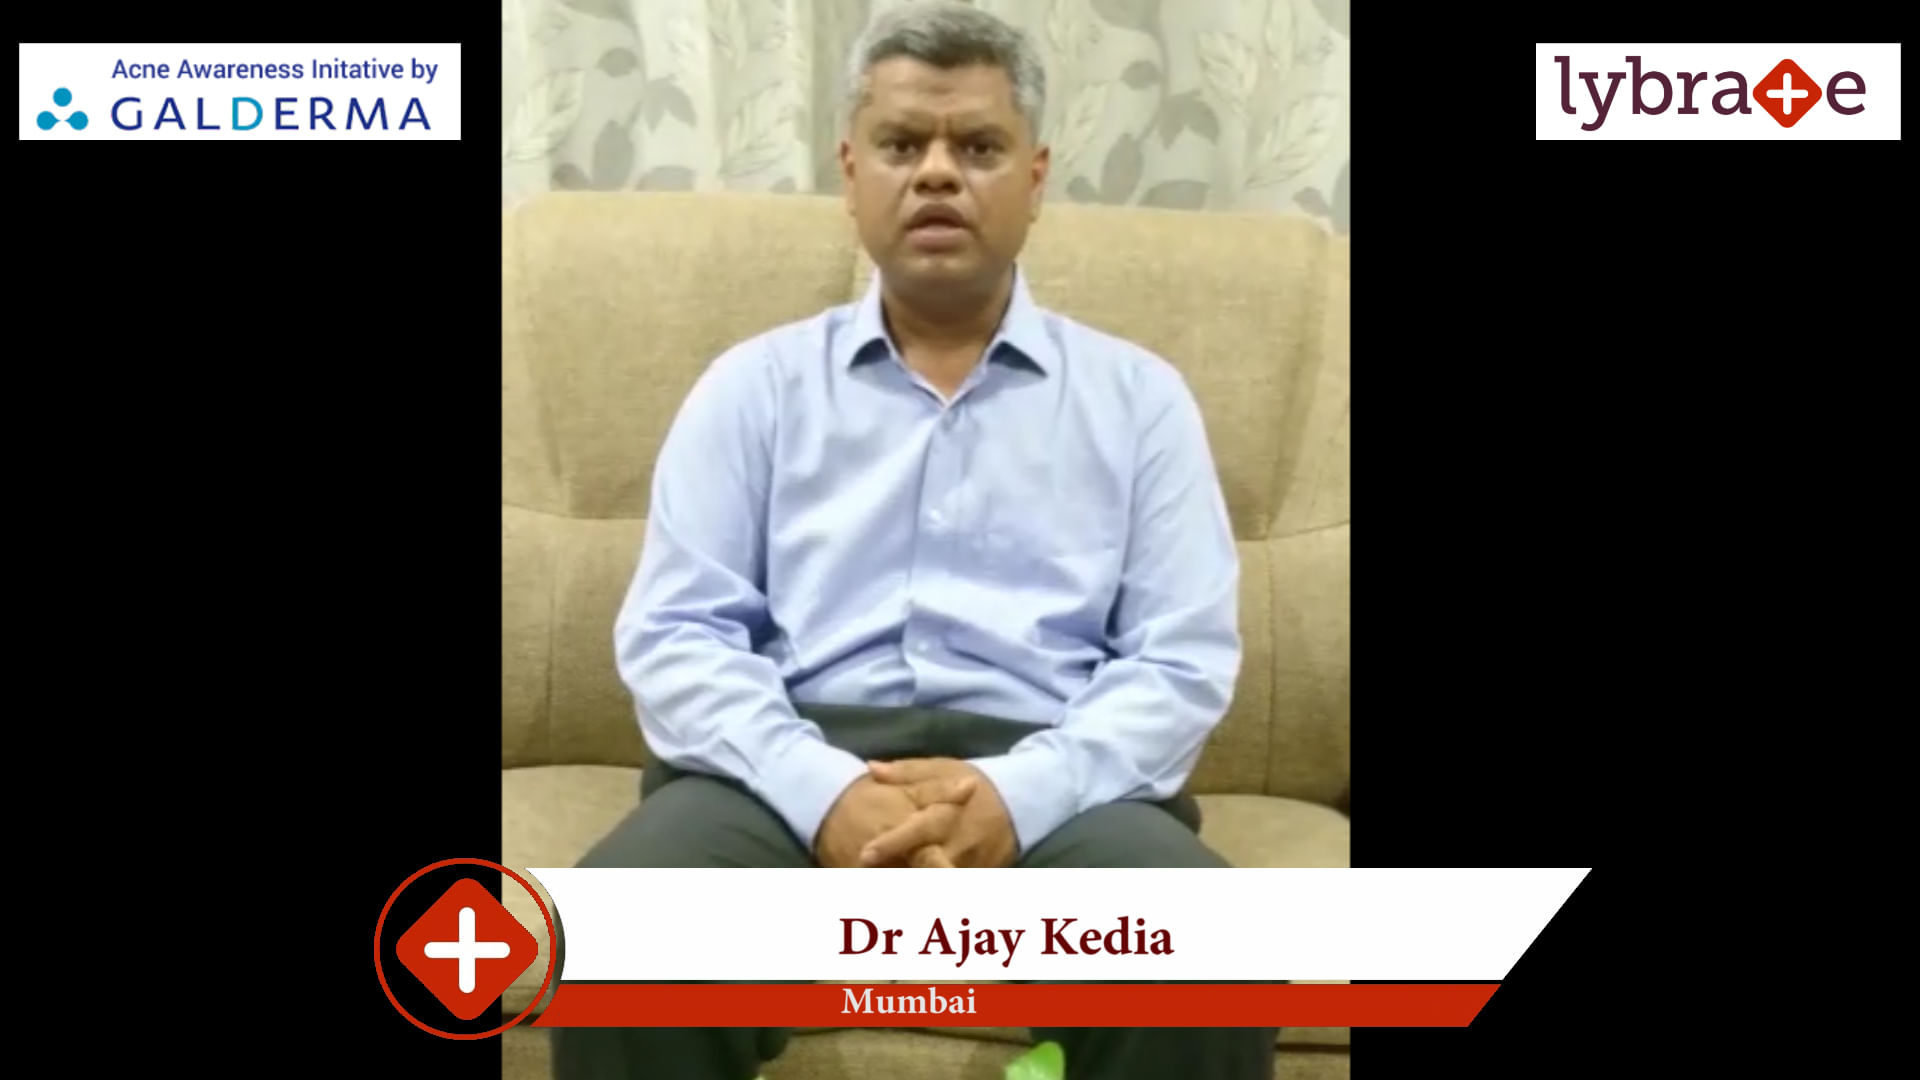 Lybrate | Dr. Ajay Kedia speaks on IMPORTANCE OF TREATING ACNE EARLY